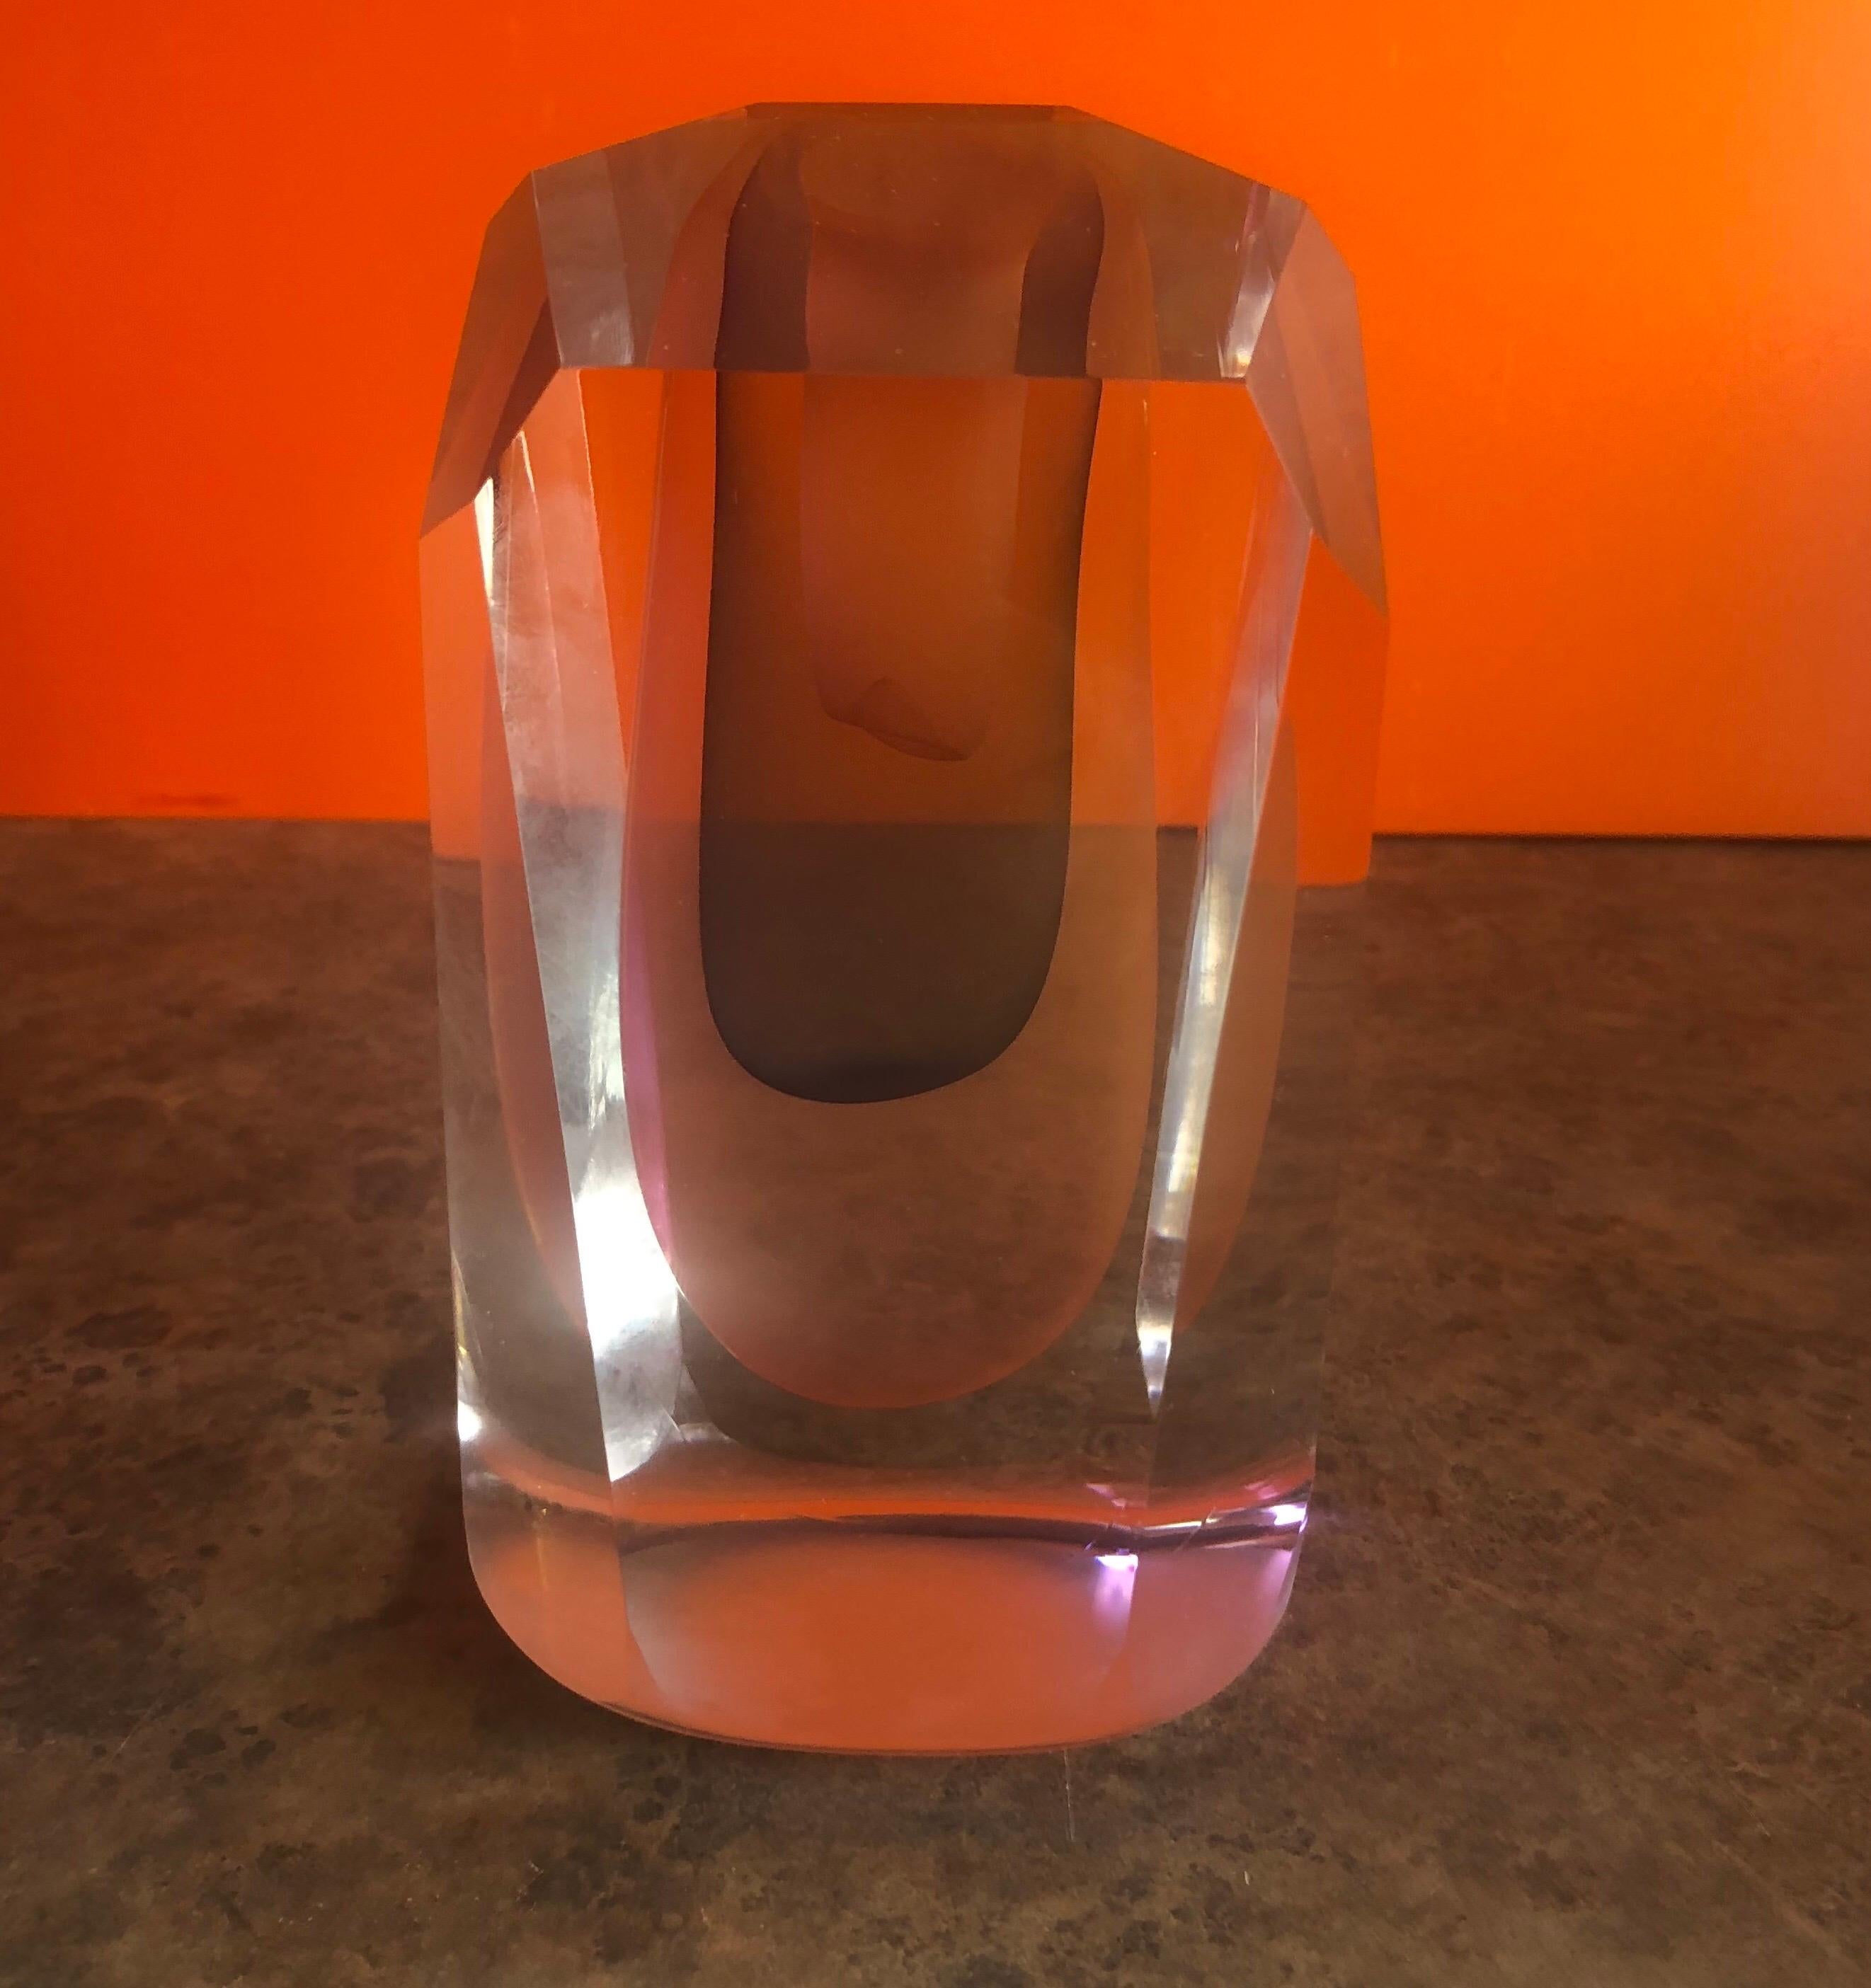 Gorgeous multifaceted (8 planes around the sides forming an uneven octagon and 6 planes on top of the piece) art glass sculpture / oversized paperweight by Ed Nesteruk, circa 1982. The piece is clear glass with two reddish pink and one blue oblong